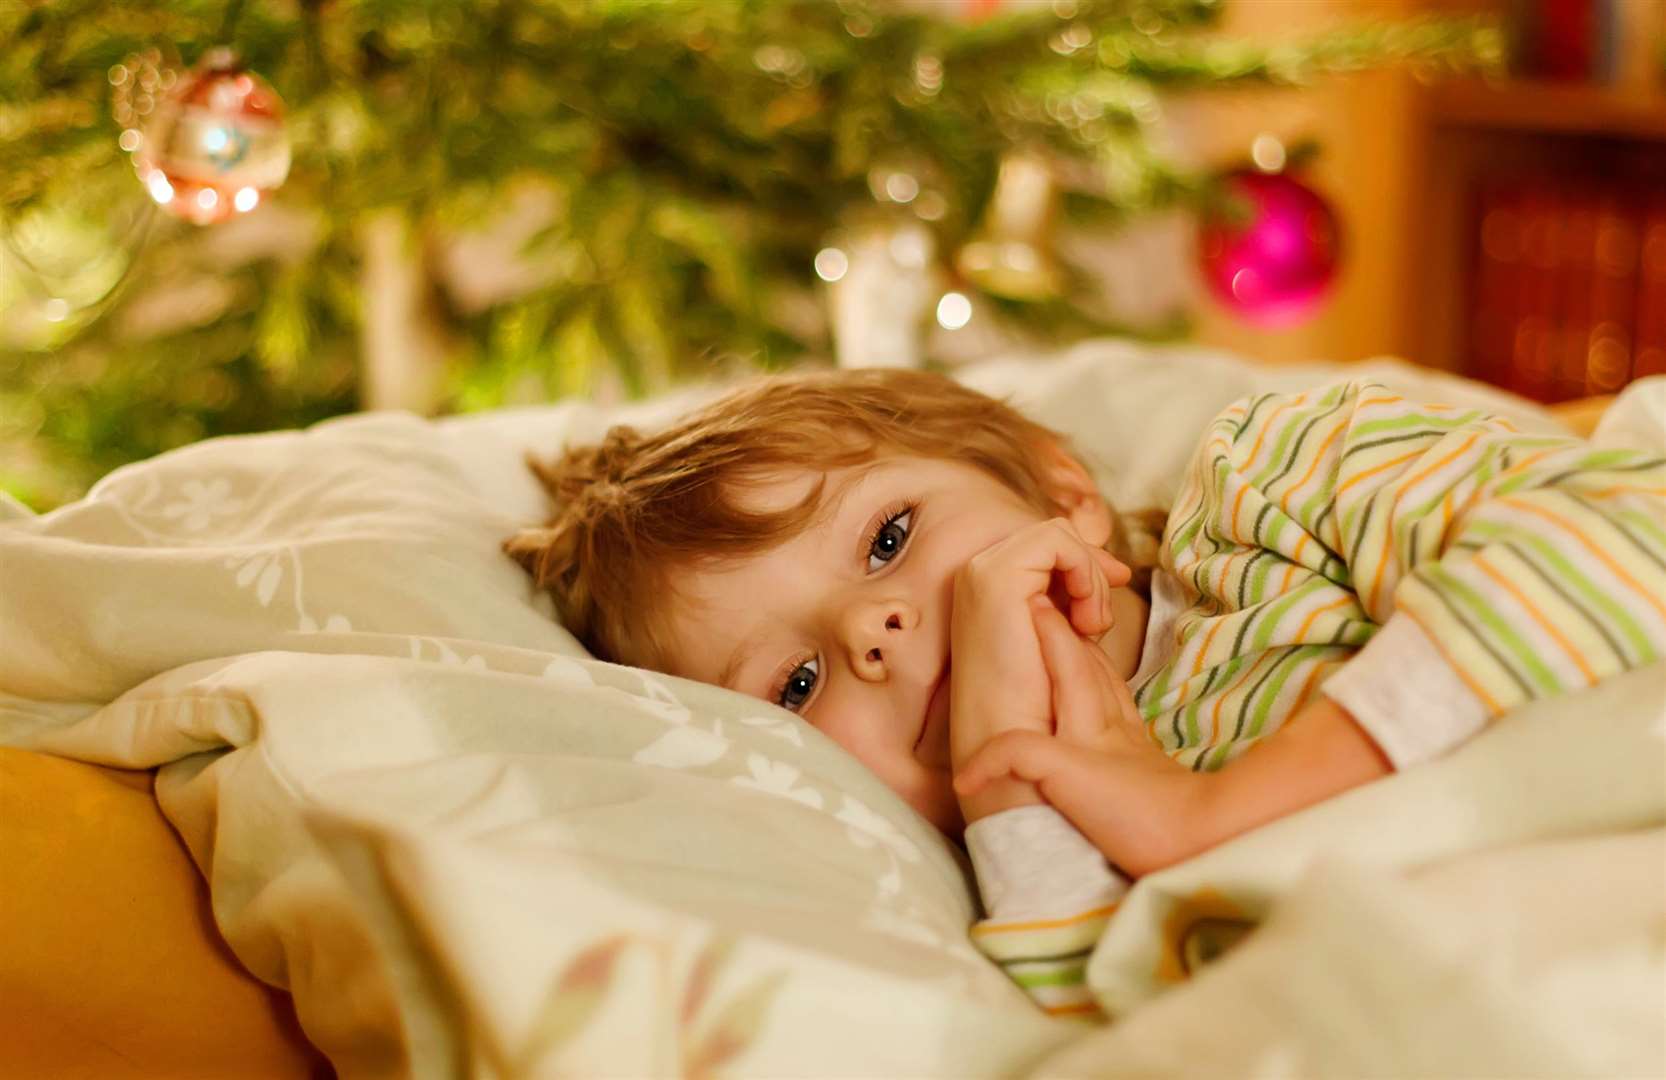 We've asked the experts how best to get the kids to sleep on Christmas Eve